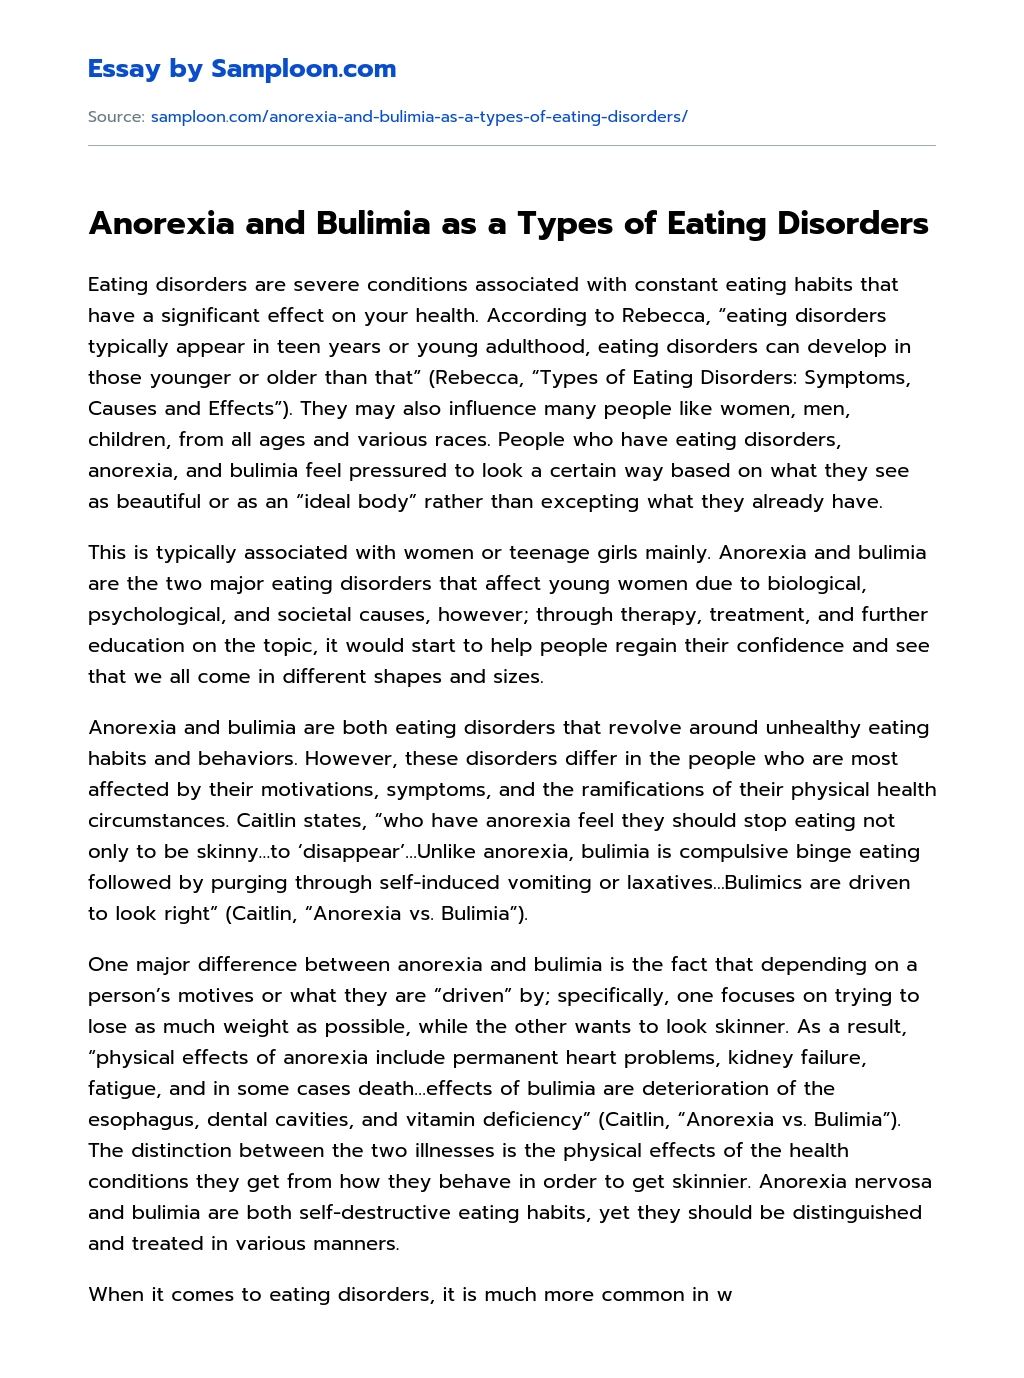 Anorexia and Bulimia as a Types of Eating Disorders essay